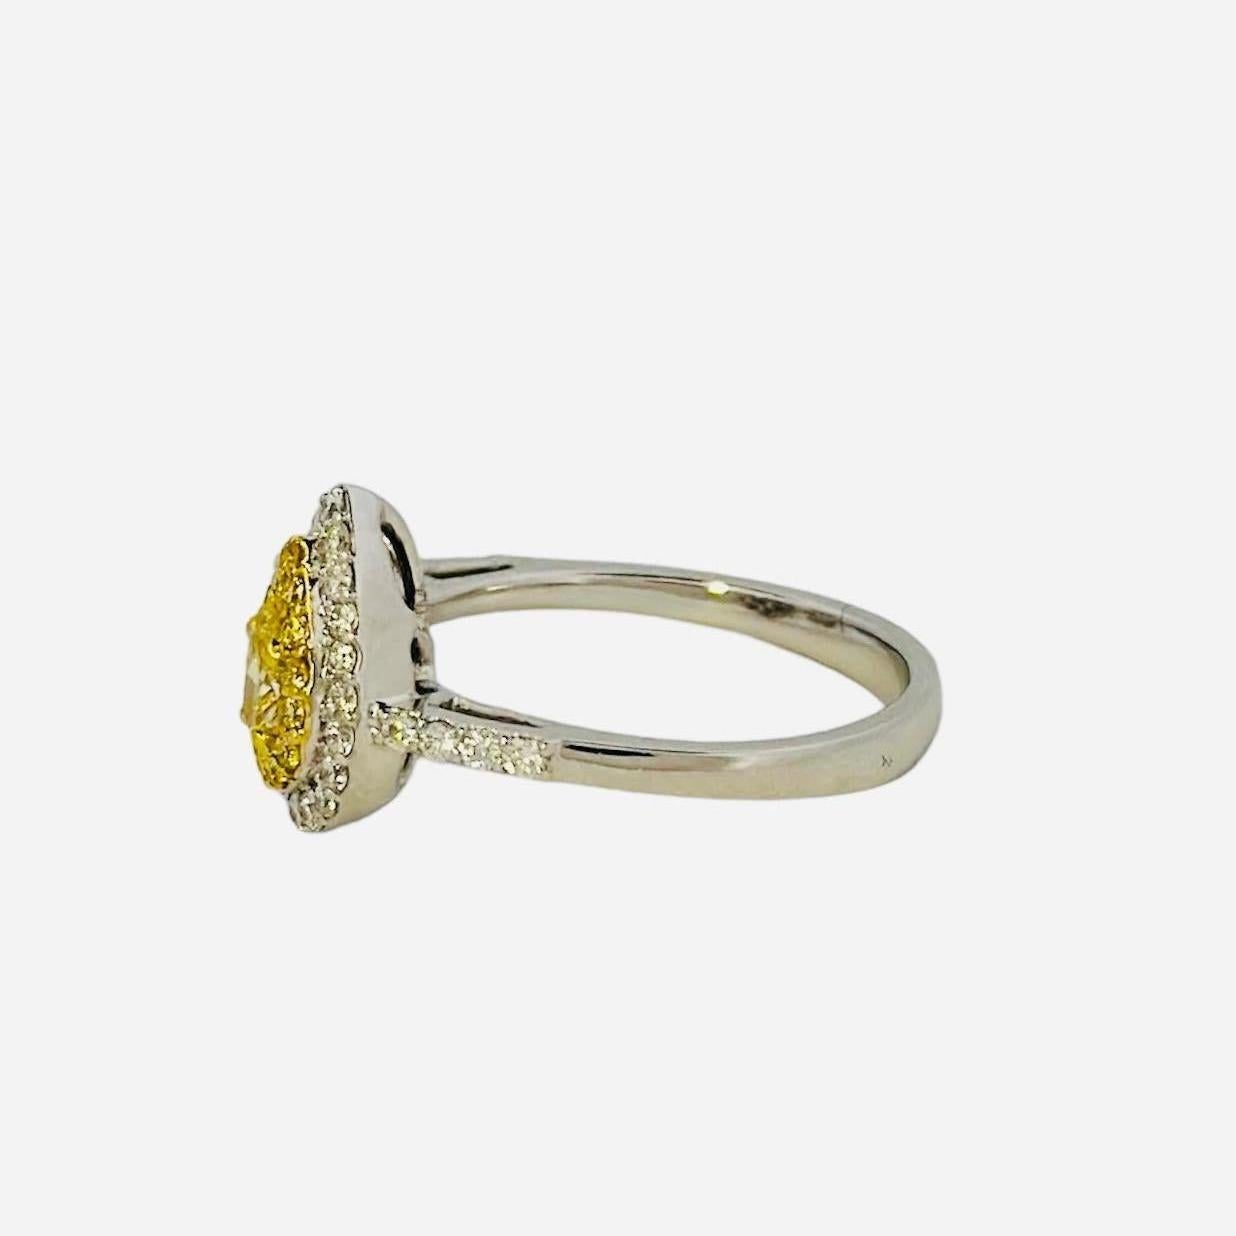 Introducing our exquisite Yellow Pear-Shaped Diamond Ring, a dazzling masterpiece radiating elegance and sophistication, a true testament to exceptional craftsmanship and fancy shaped diamonds. At its core, a brilliant 0.31-carat vibrant yellow